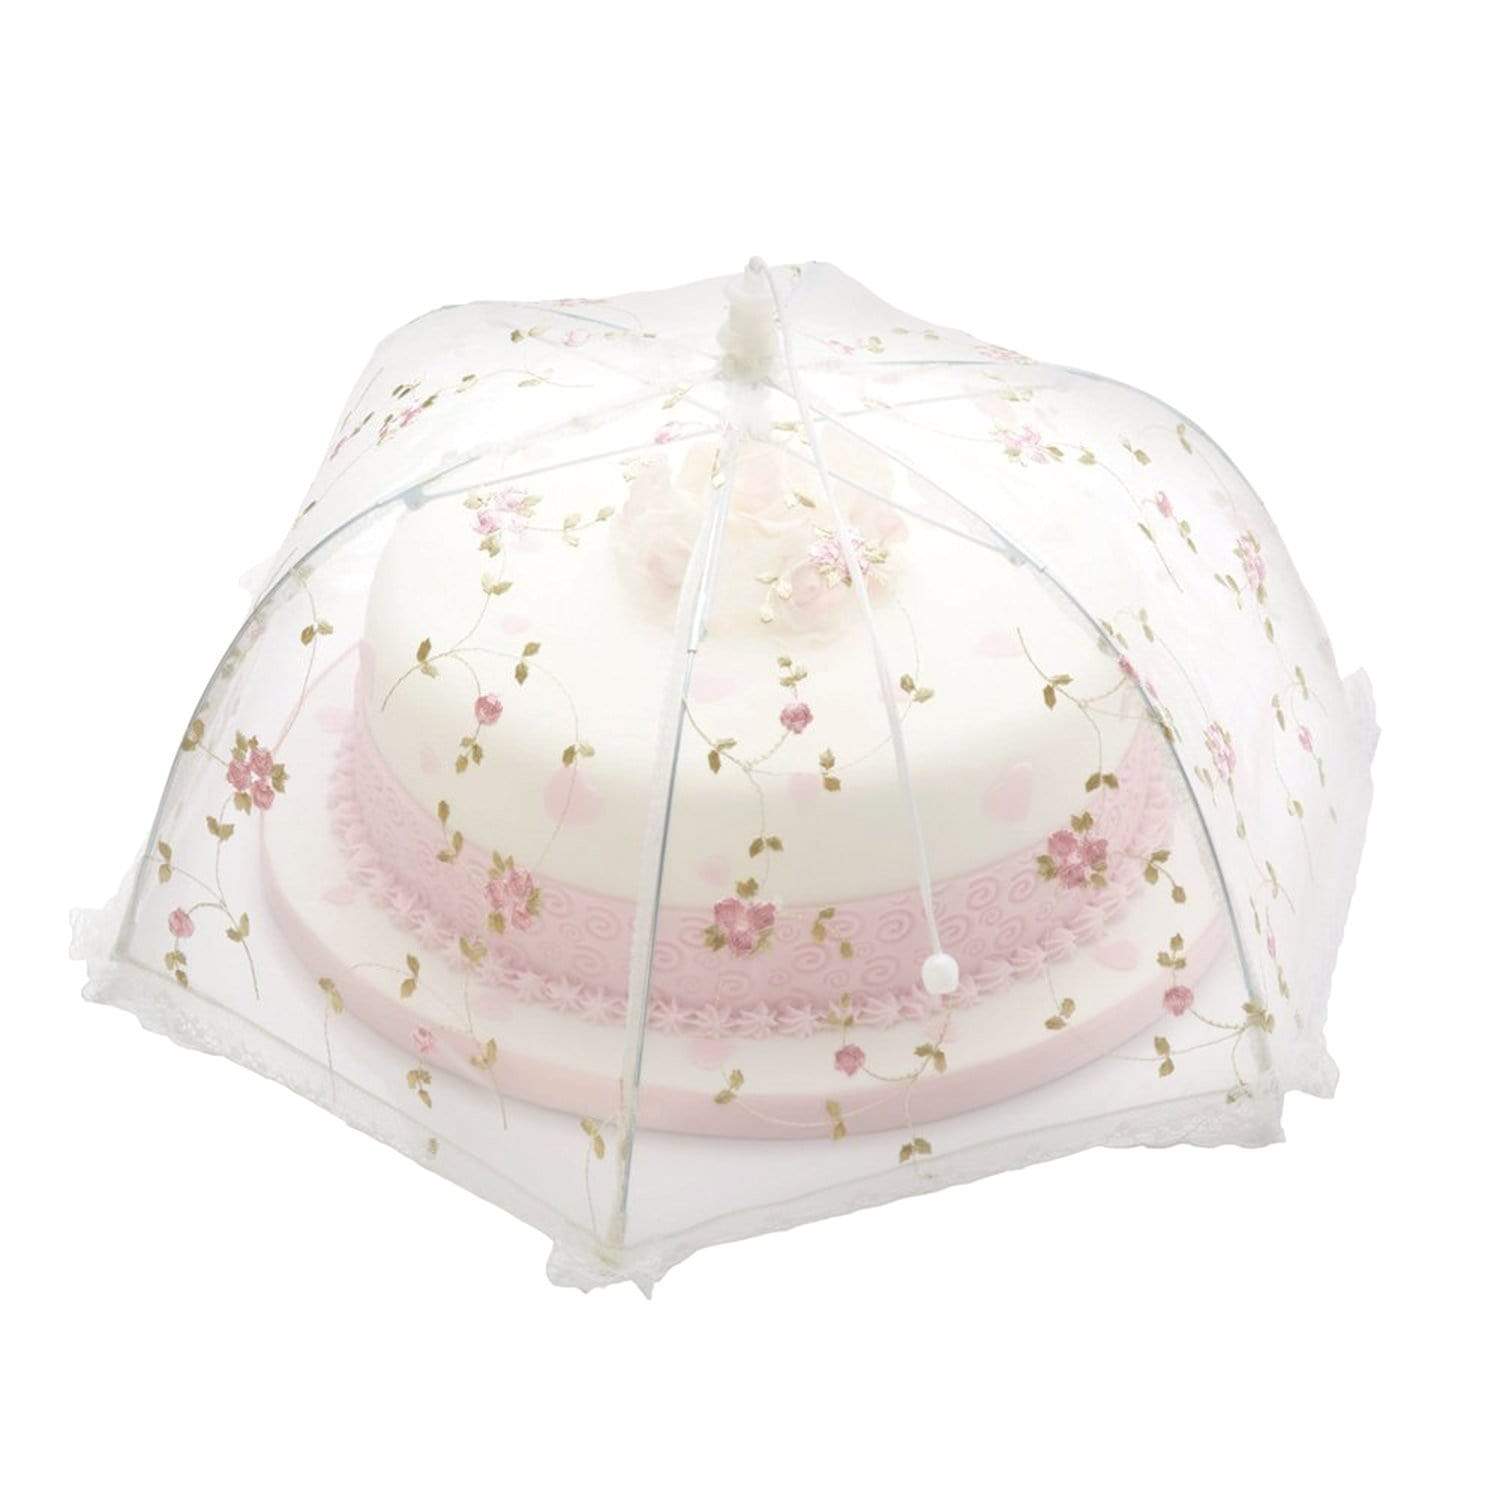 KitchenCraft Sweetly Does It Umbrella Food Cover - Clear - KCCOVFLOLRG - Jashanmal Home